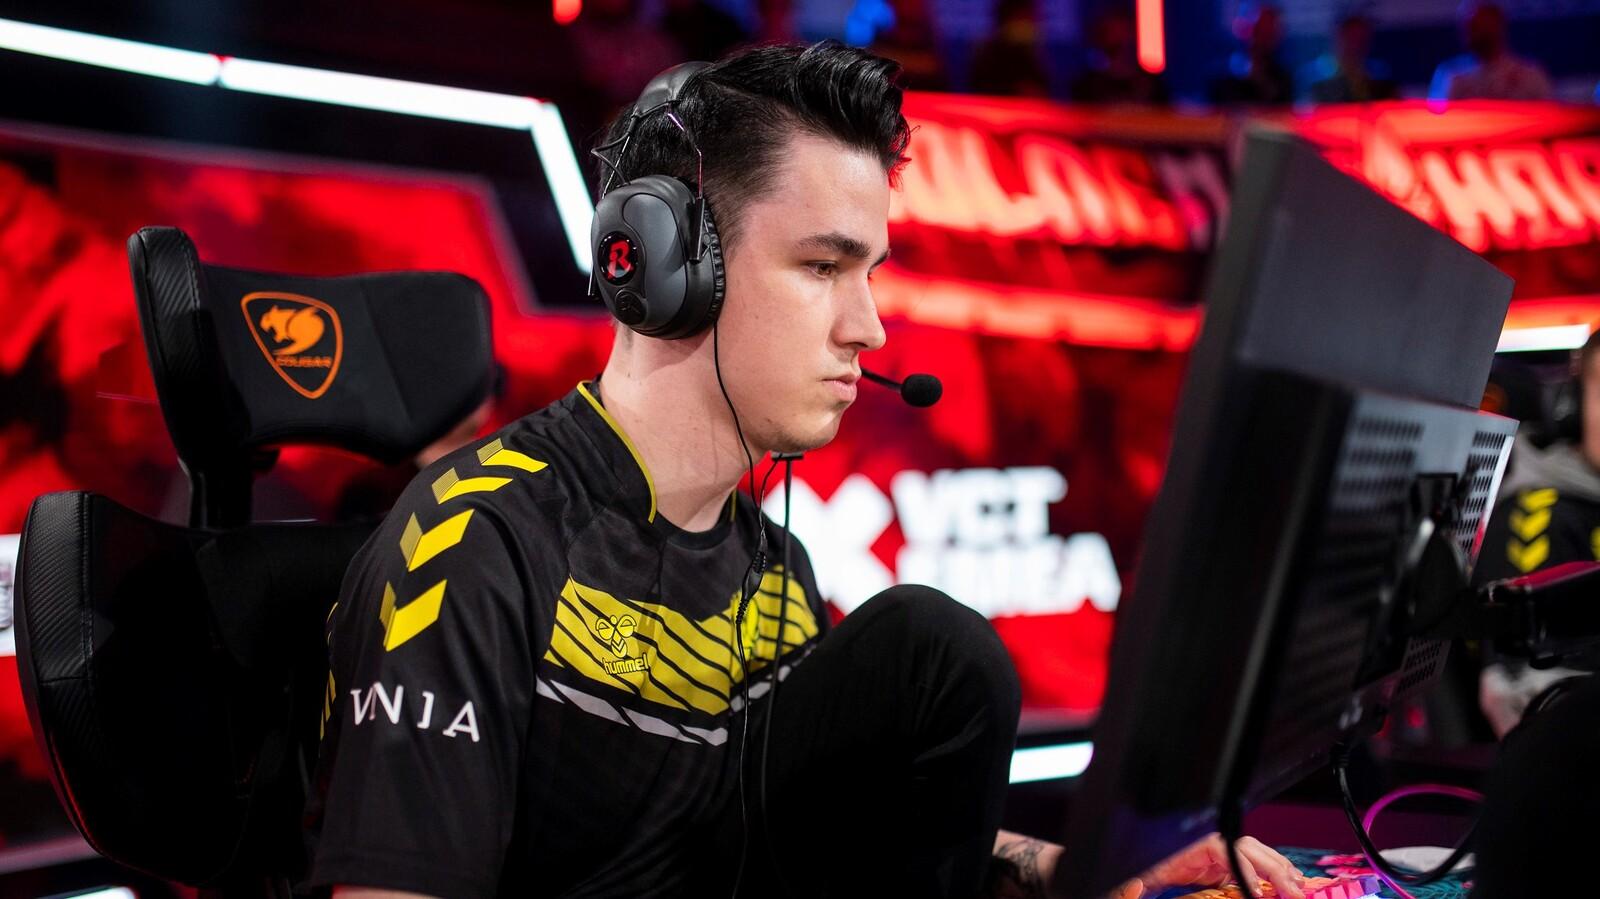 Twisten playing for Team Vitality